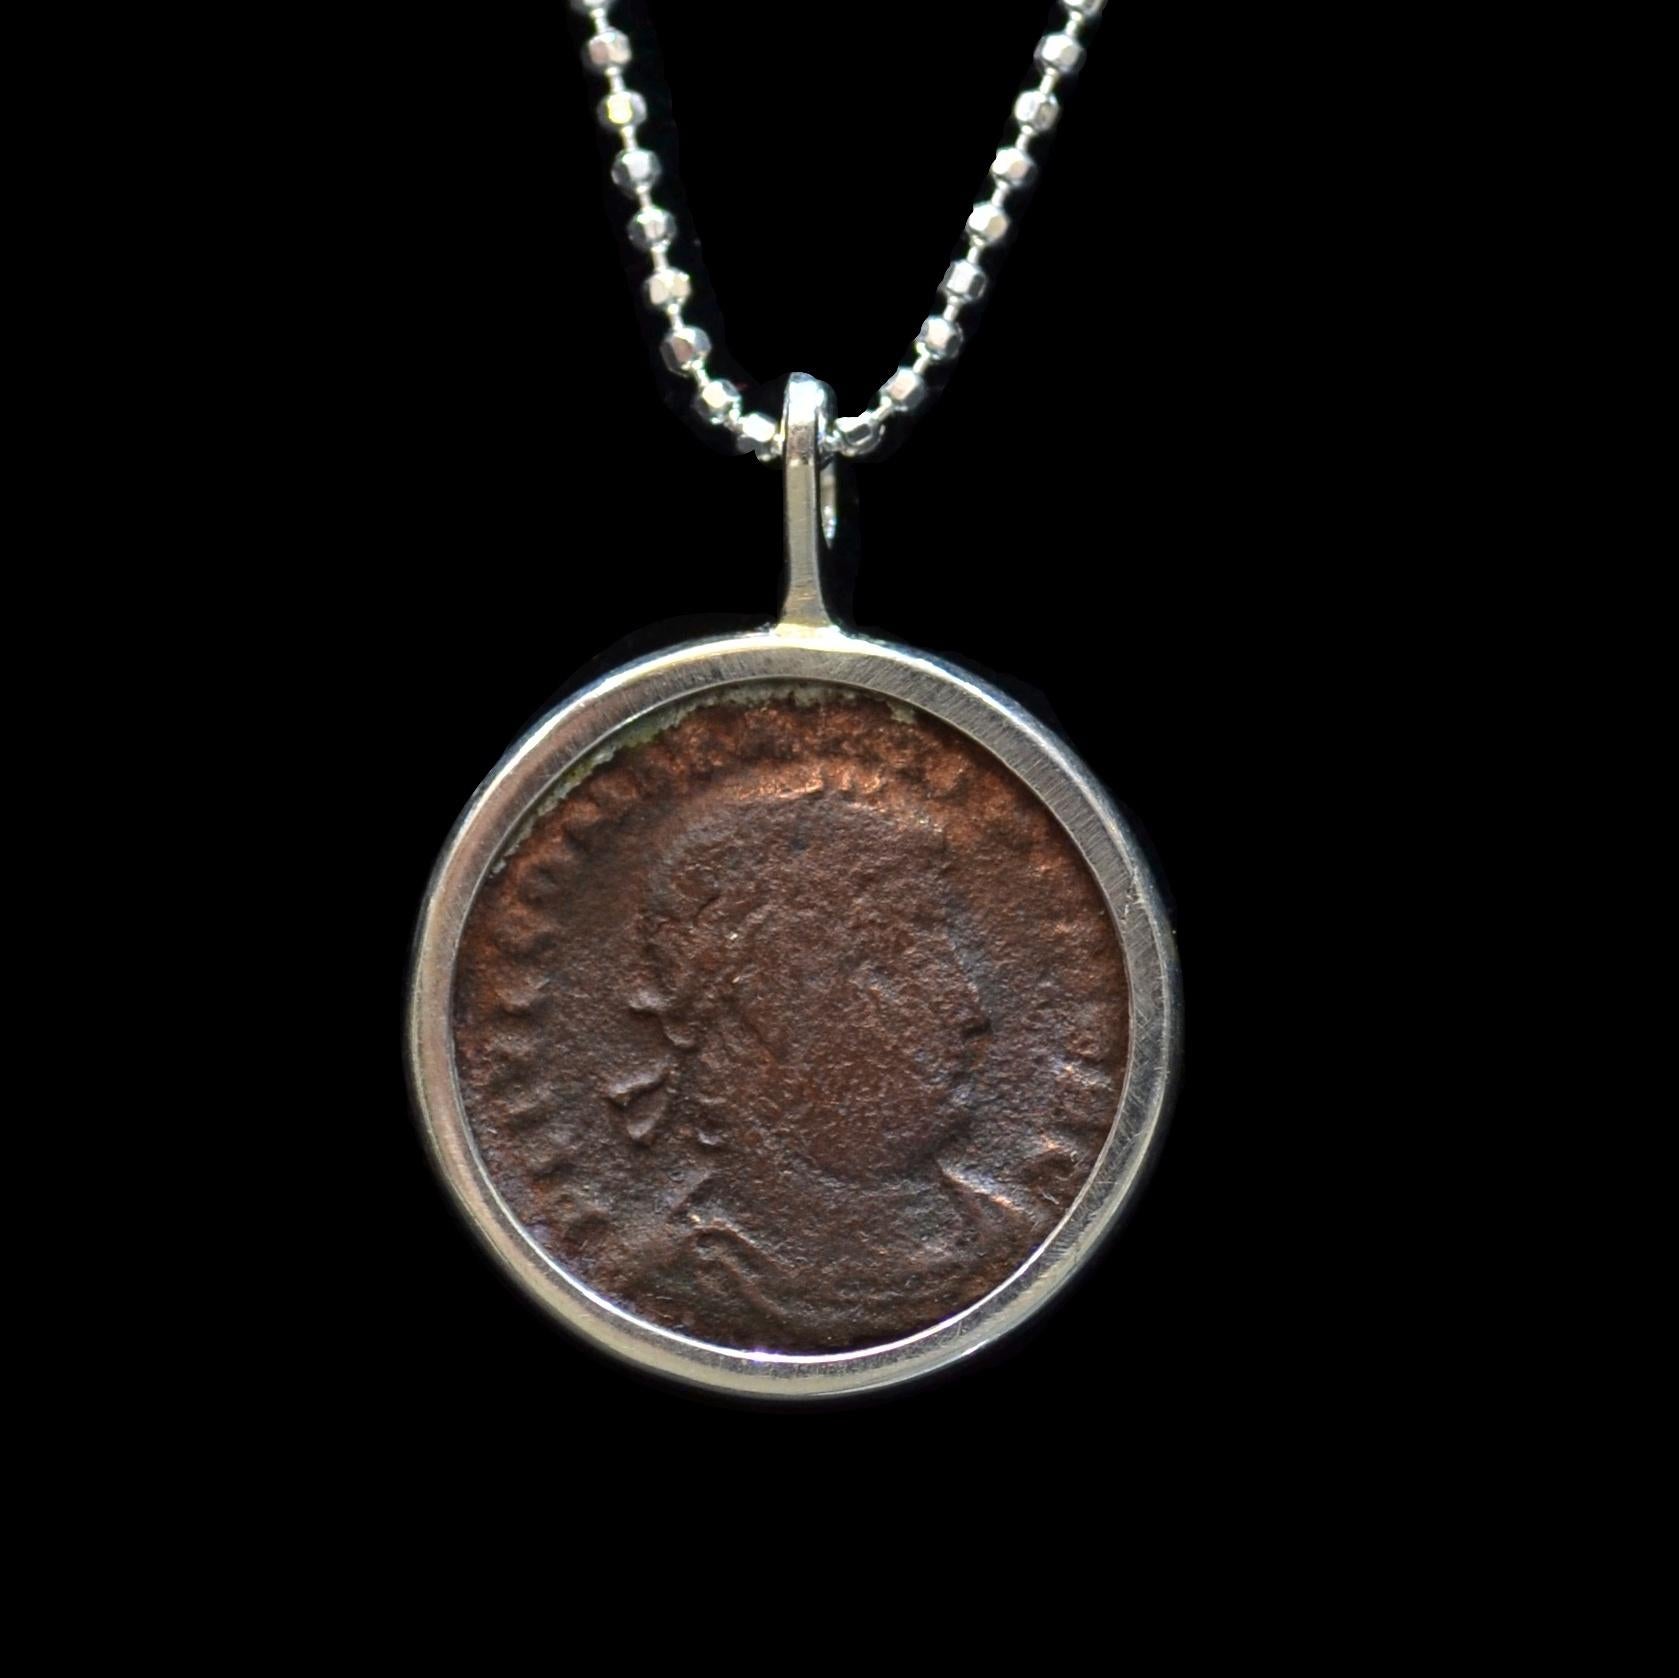 Authentic roman bronze coin  Ca. 337-361 CE mounted on contemporary silver necklace. Ready to be worn!

Flavius Julius Constantius, the second son of Constantine I and Fausta, he ascended to the throne with his brothers Constantine II and Constans